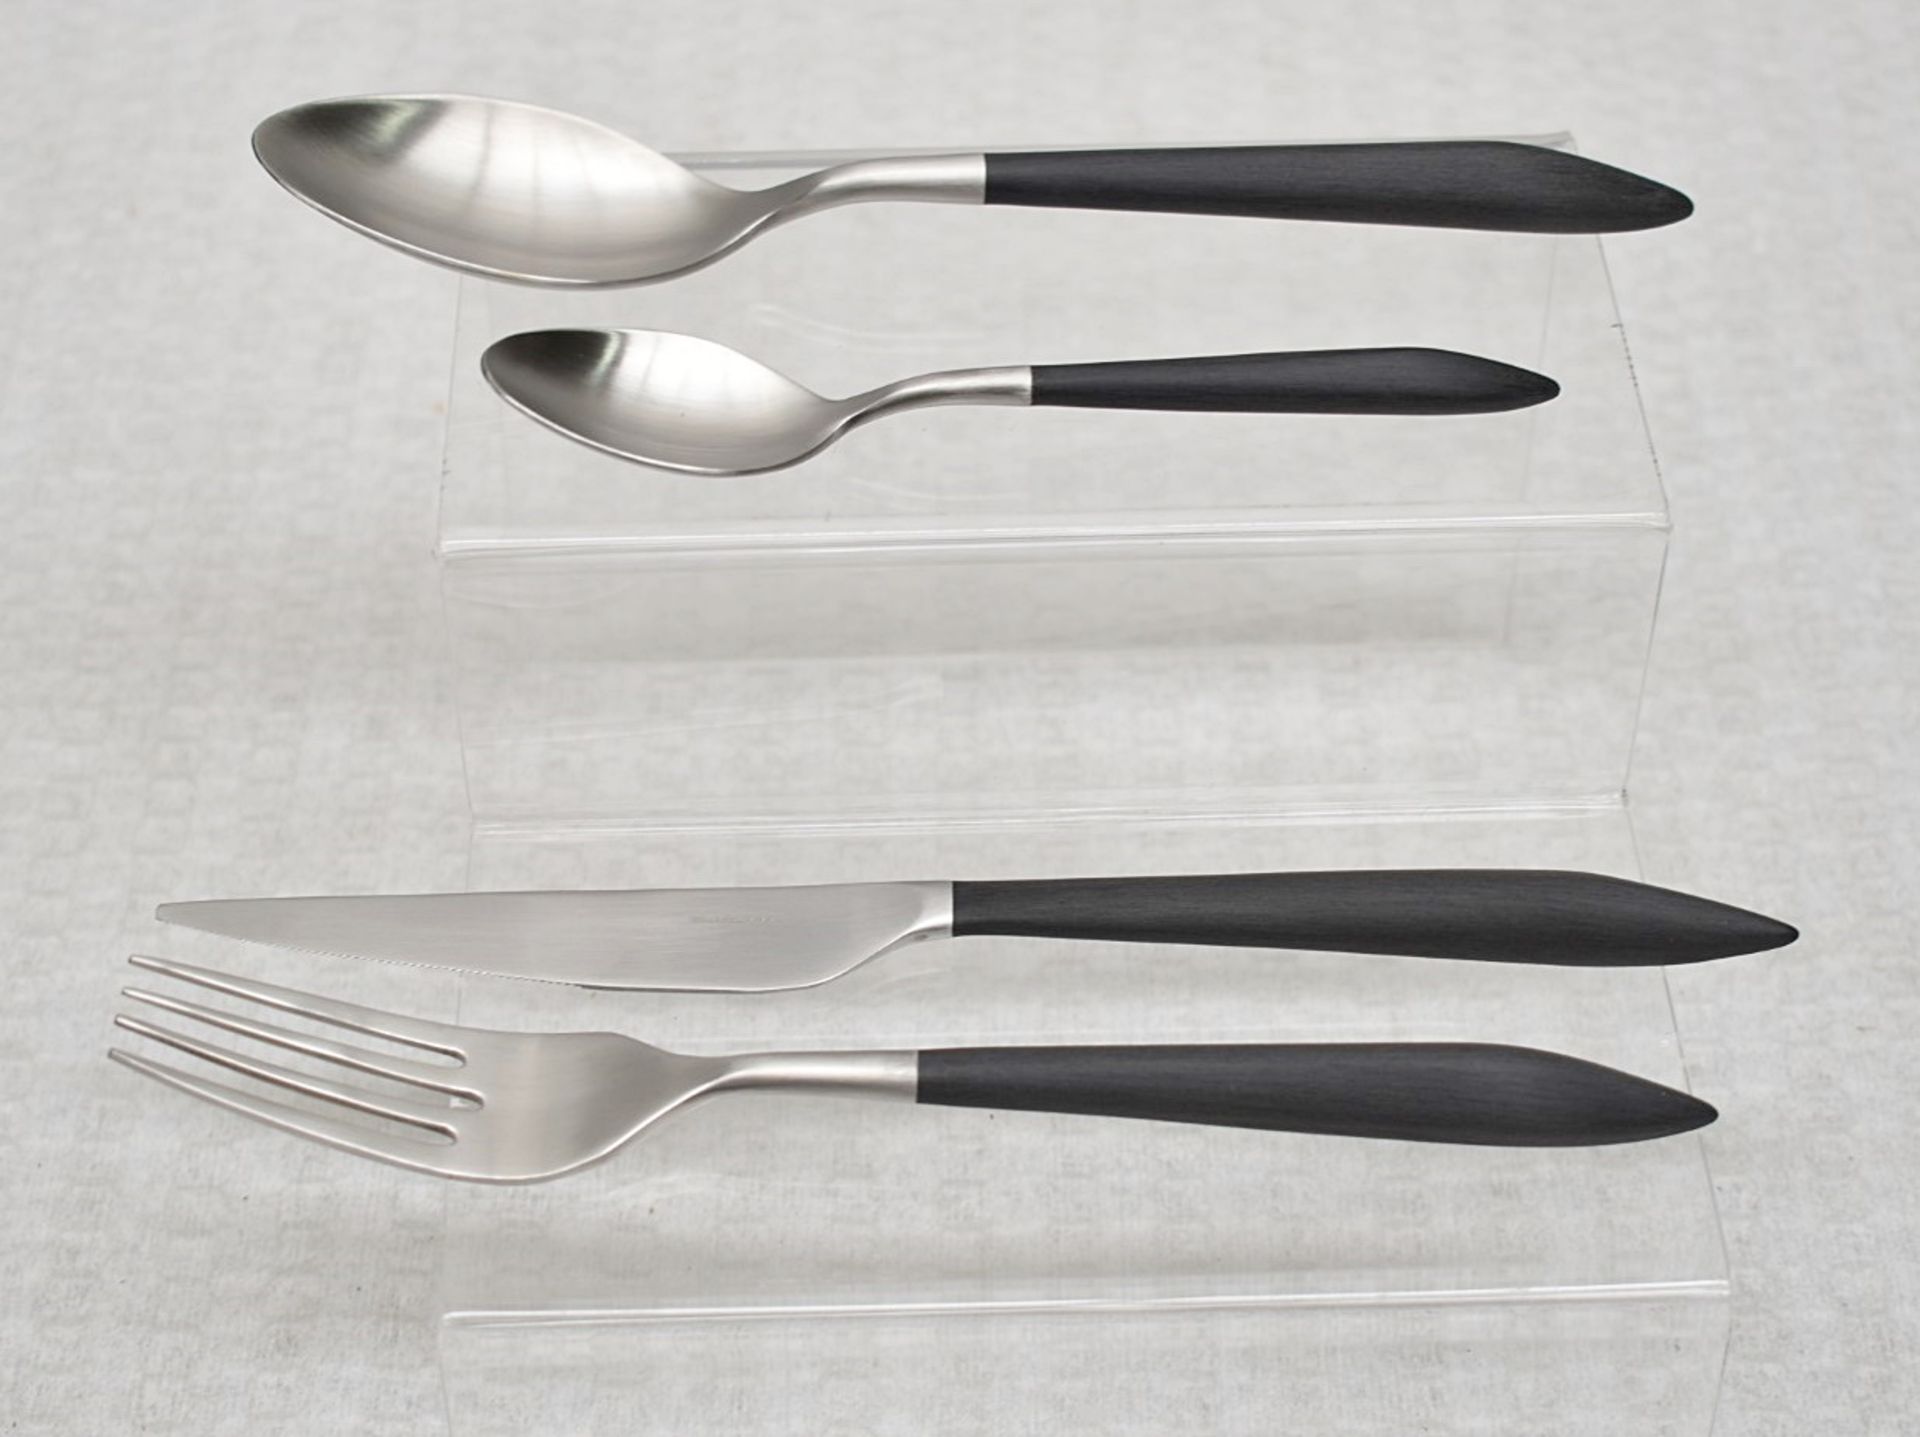 1 x BUGATTI 'Ares' Stainless Steel 24-Piece Cutlery Set - RRP £299.99 - Boxed Stock - Image 7 of 10